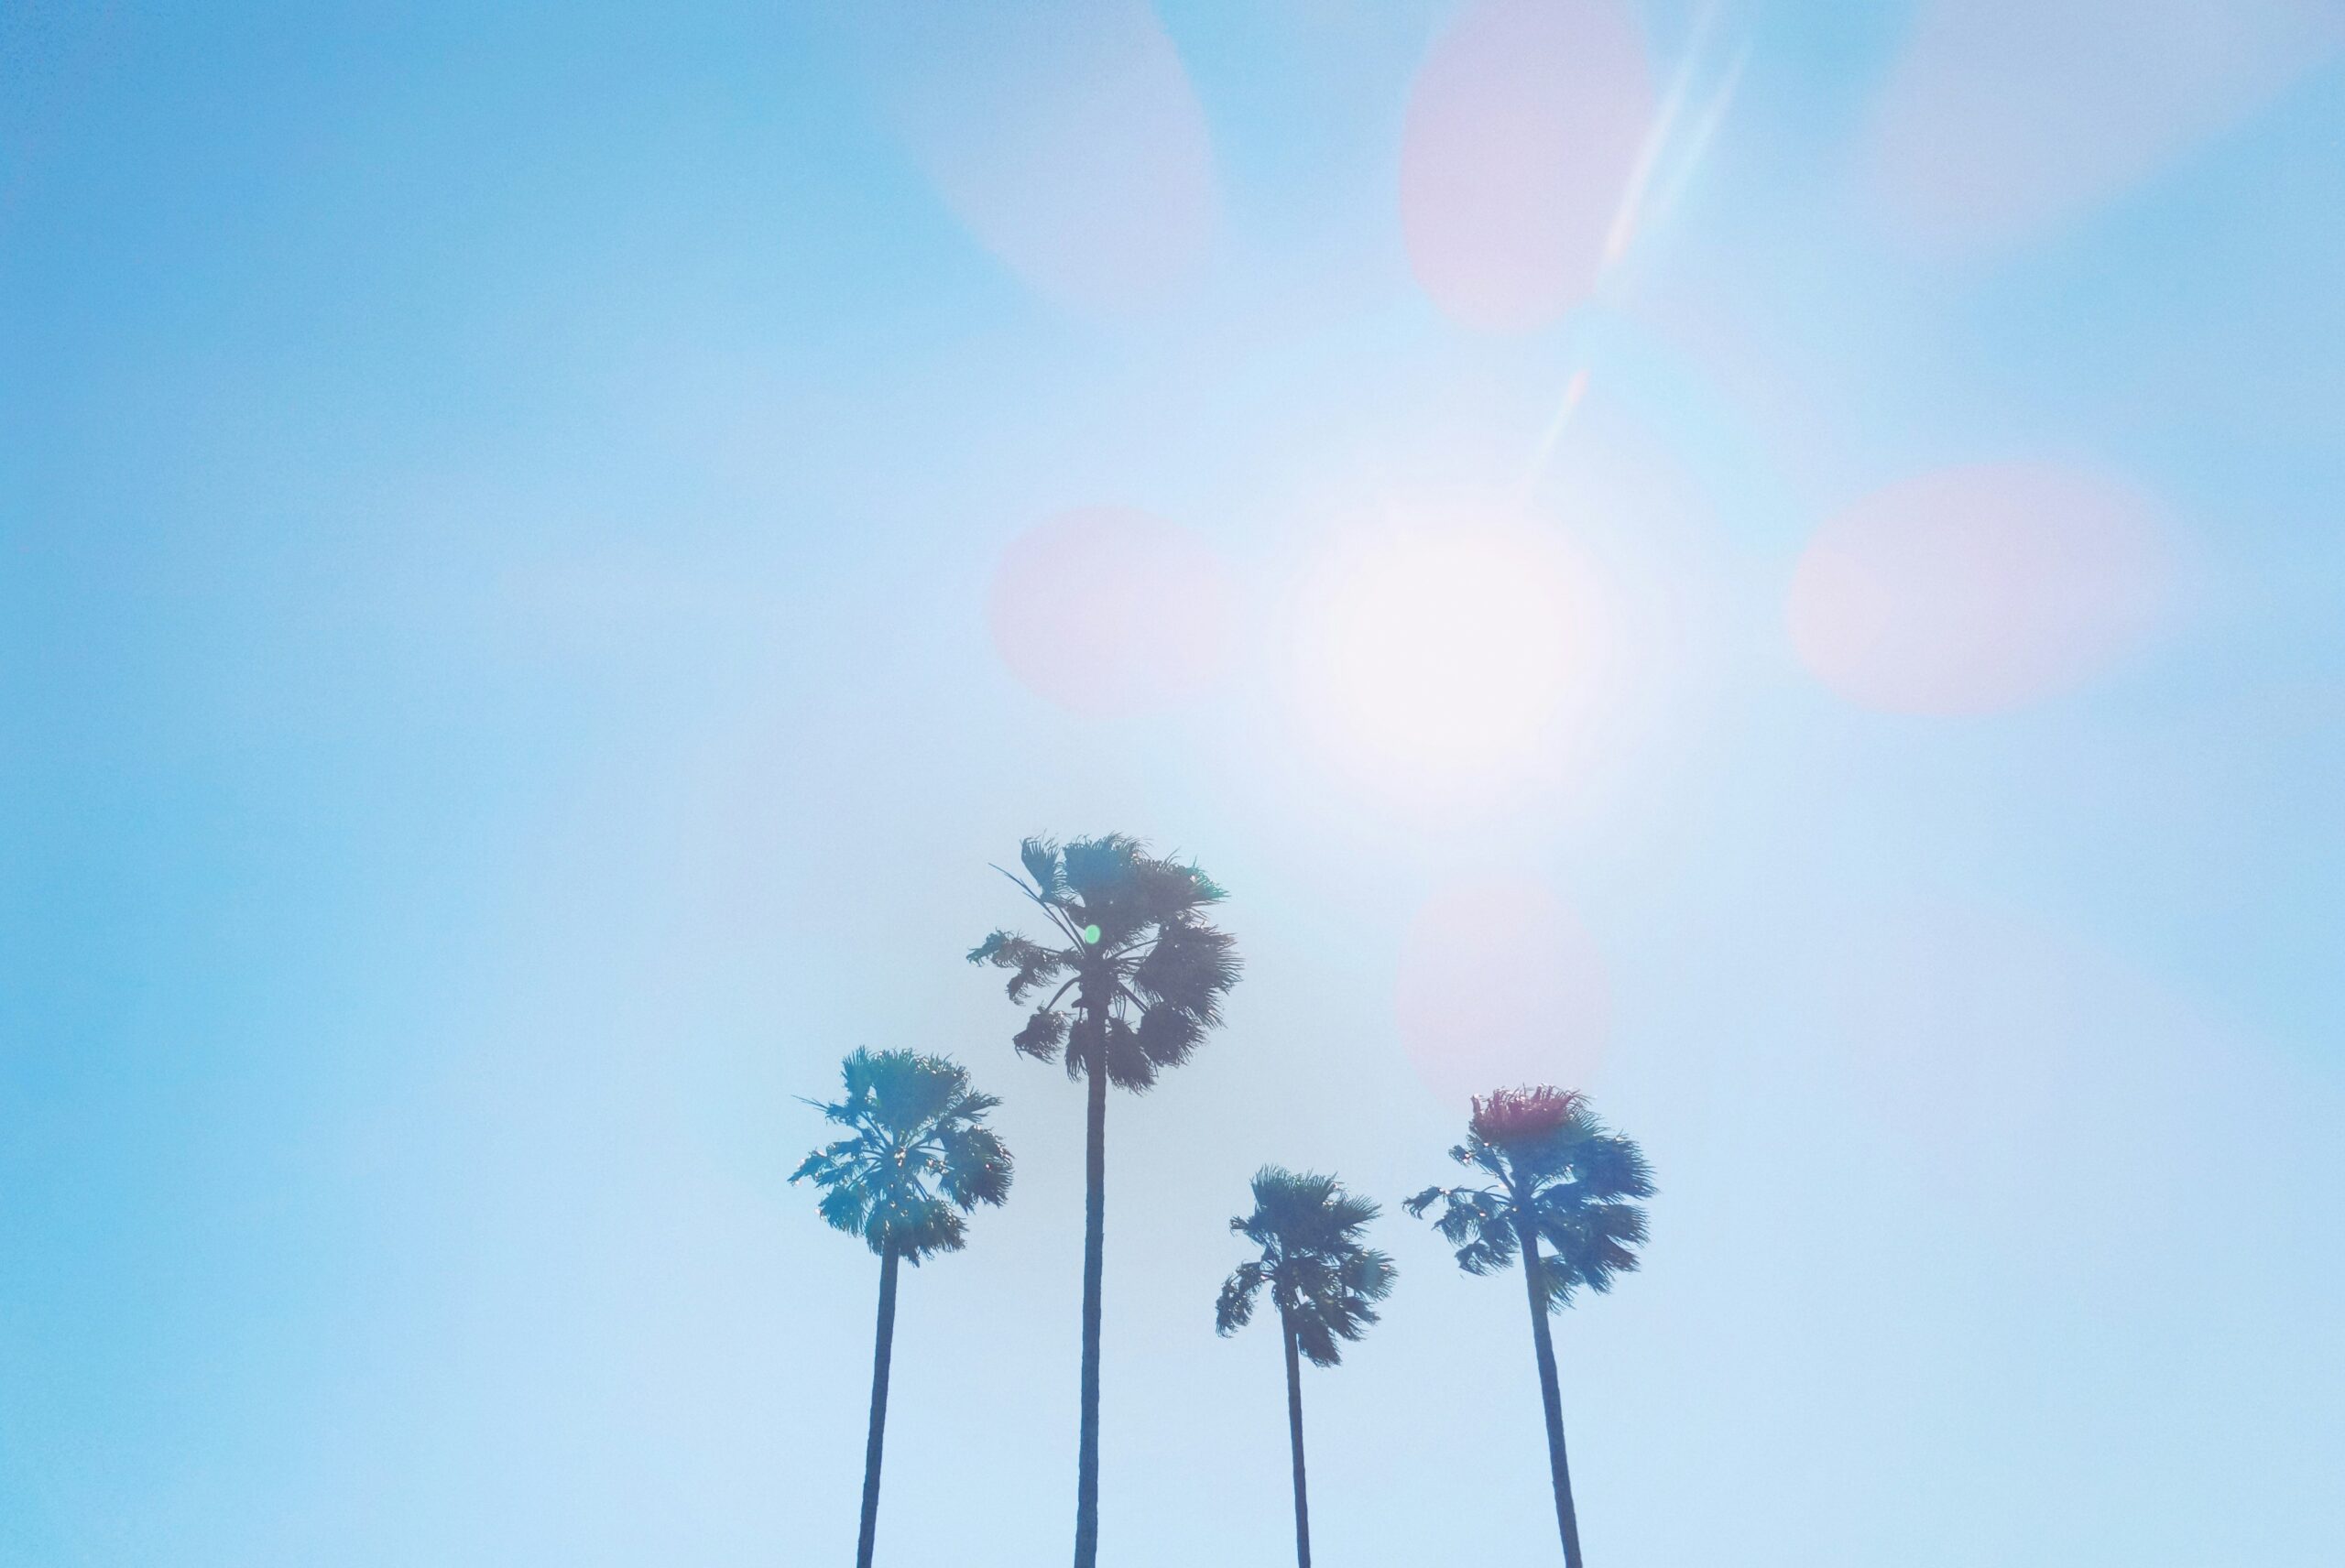 image looking up at four palm trees against a bright sky